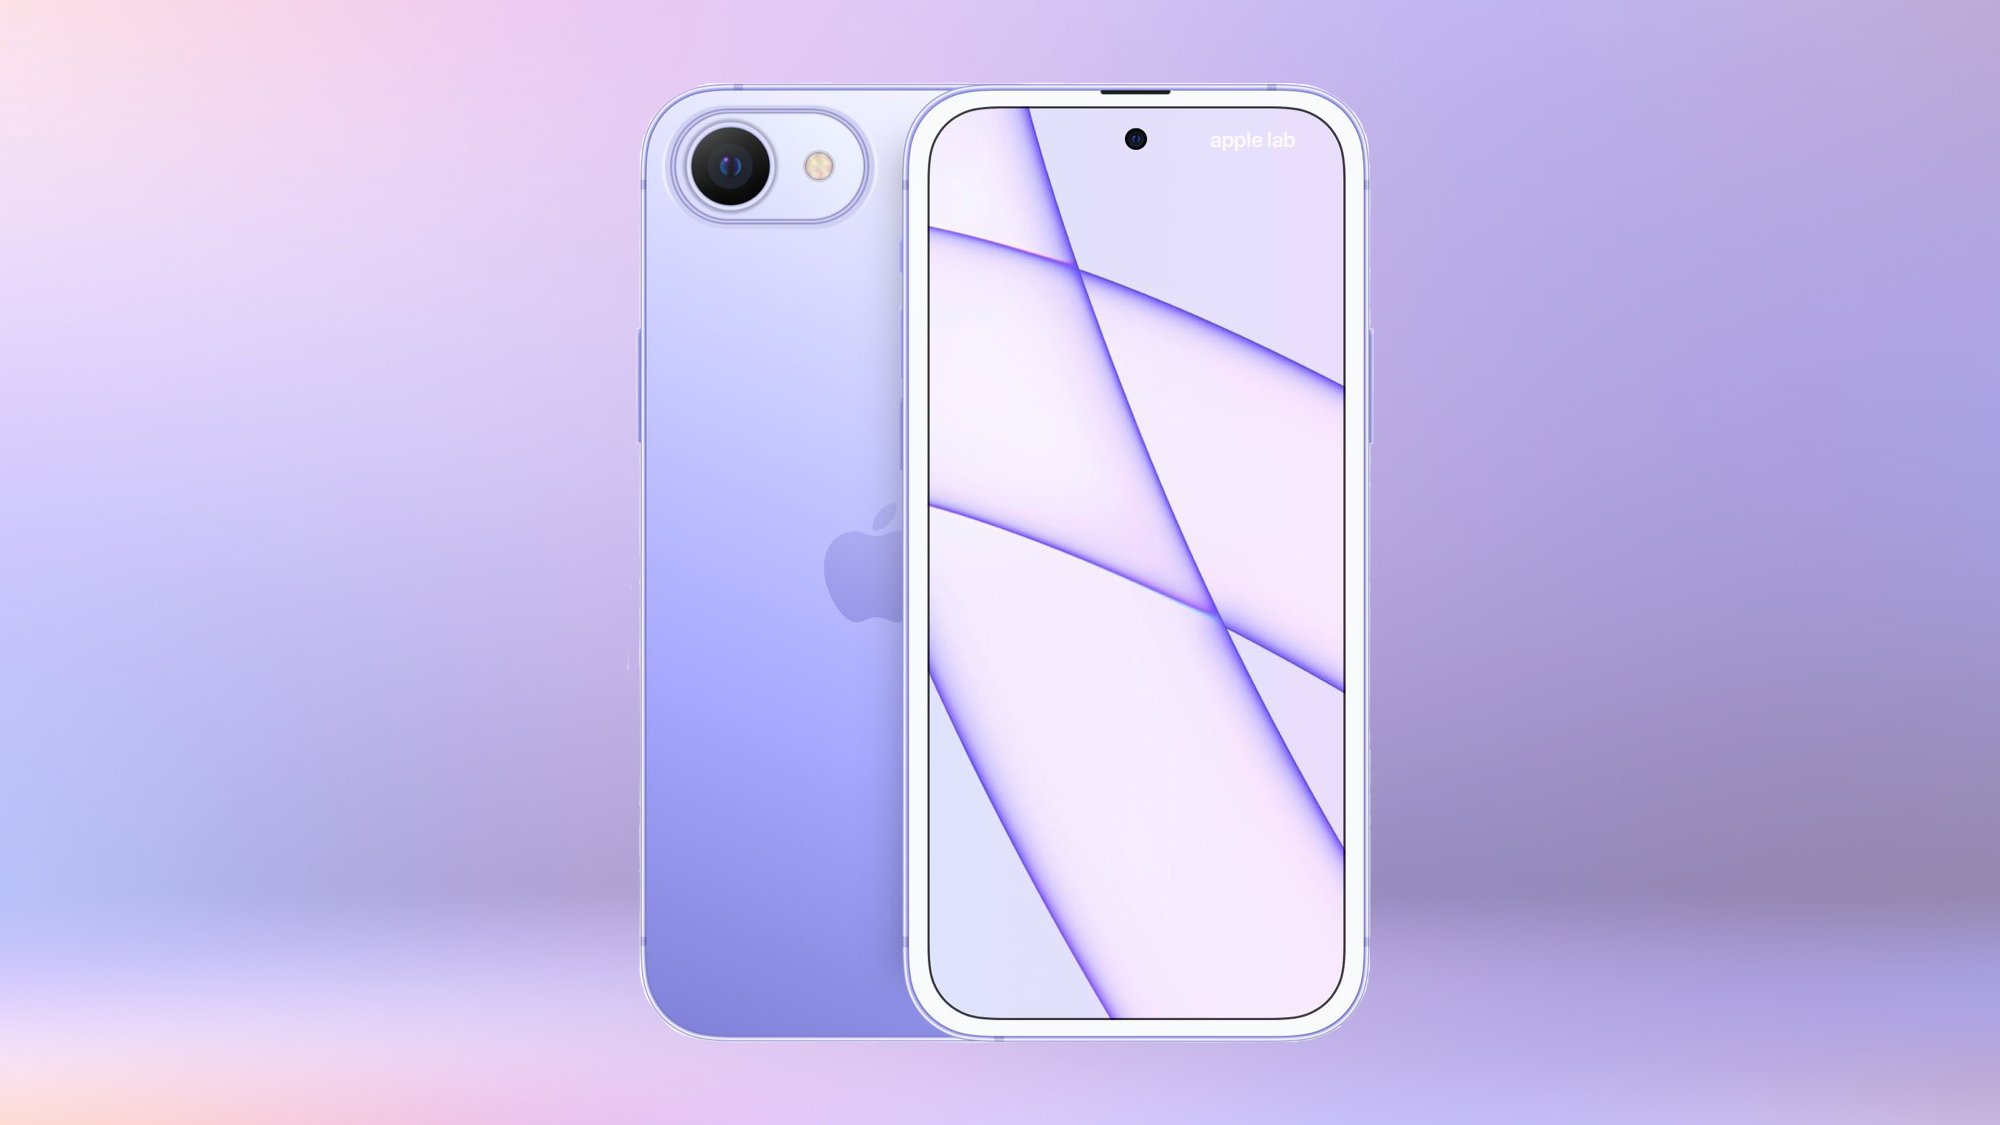 This Iphone Se Design Shows The Future Of Compact Apple Phones That We Want Tom S Guide